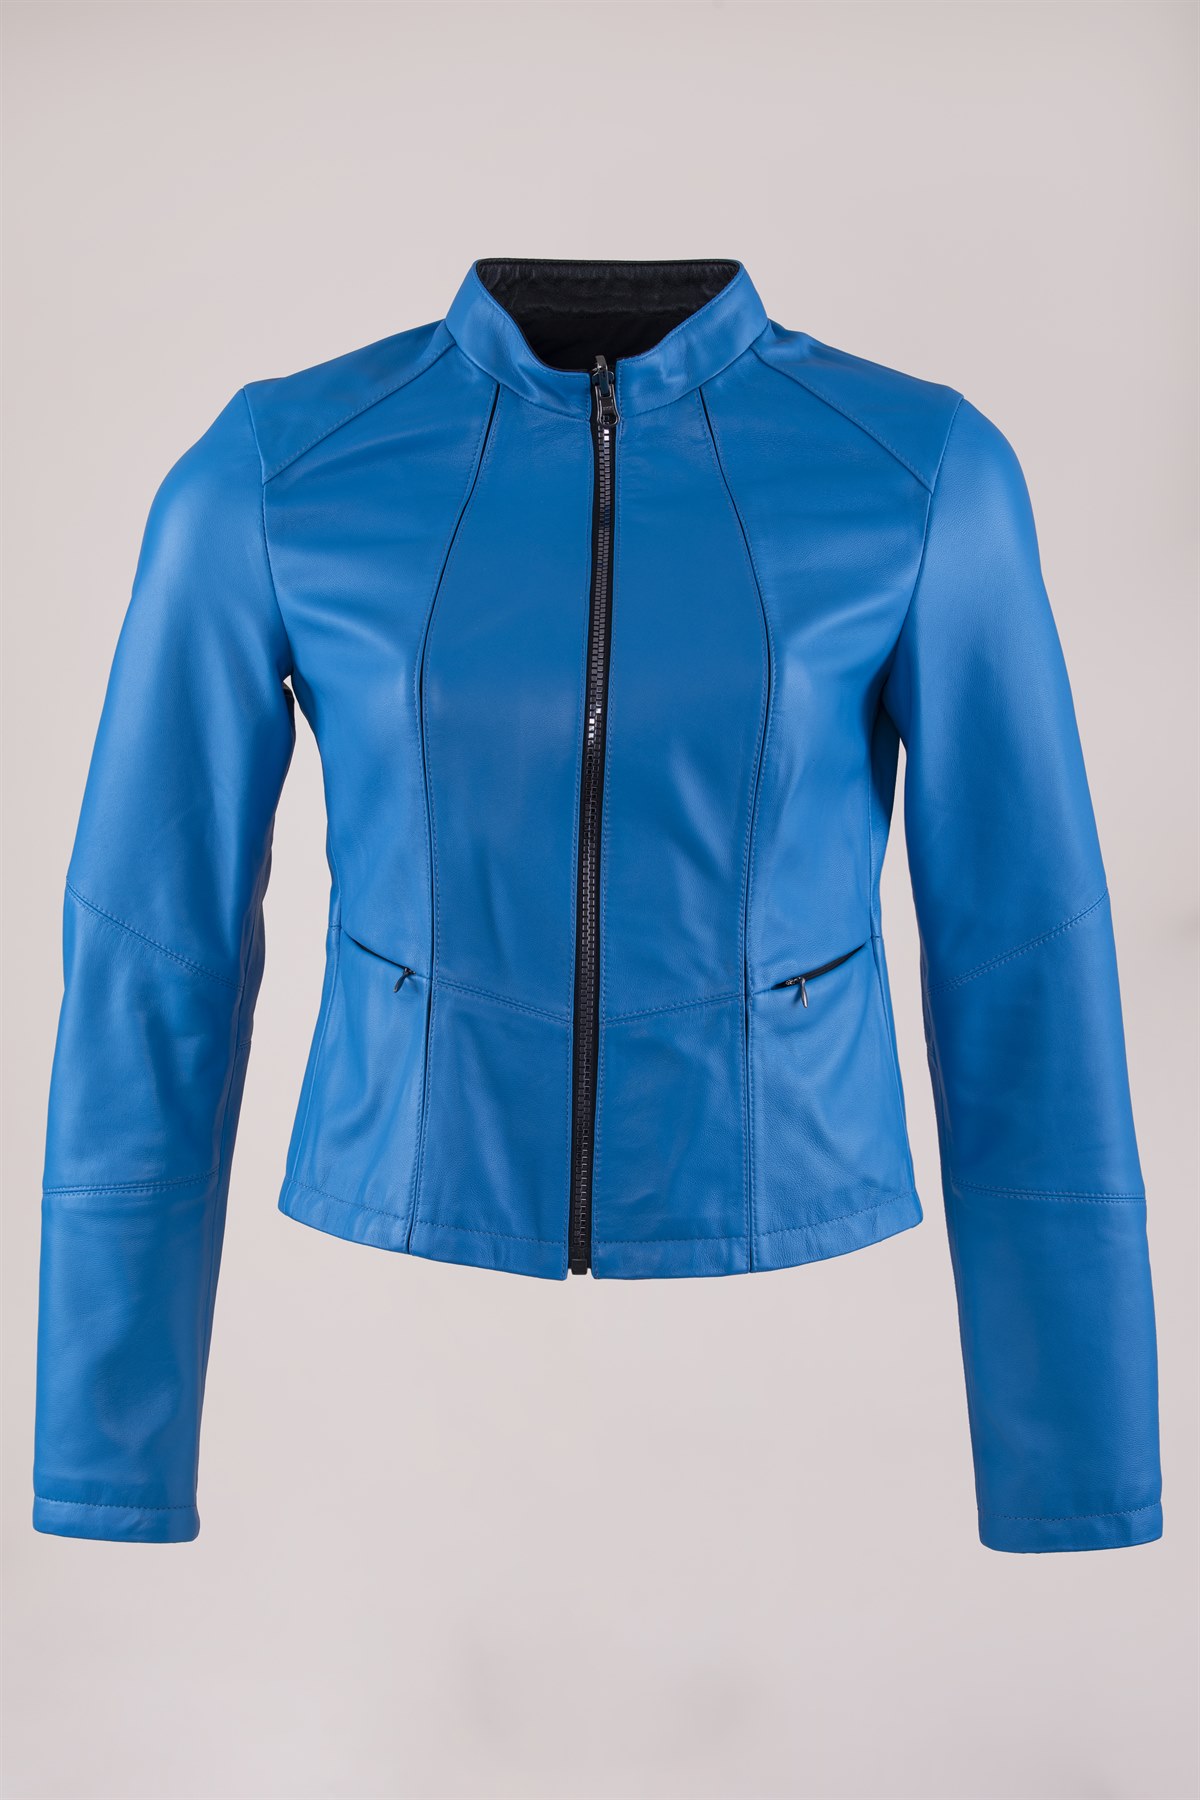 Picture of The best female retro blue leather jacket